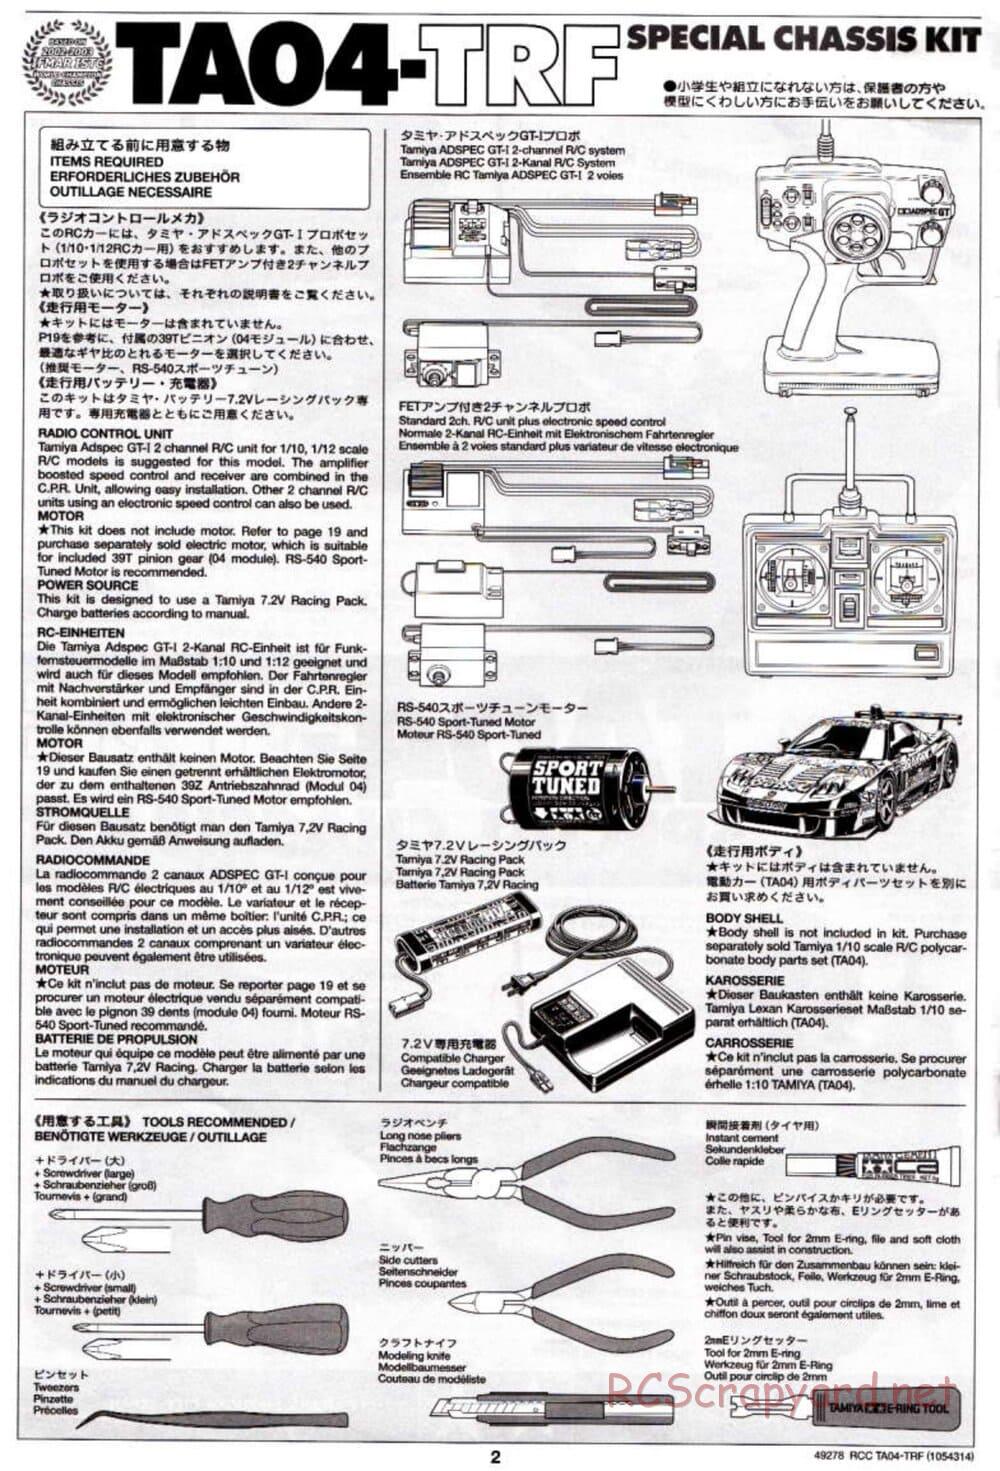 Tamiya - TA-04 TRF Special Chassis Chassis - Manual - Page 2